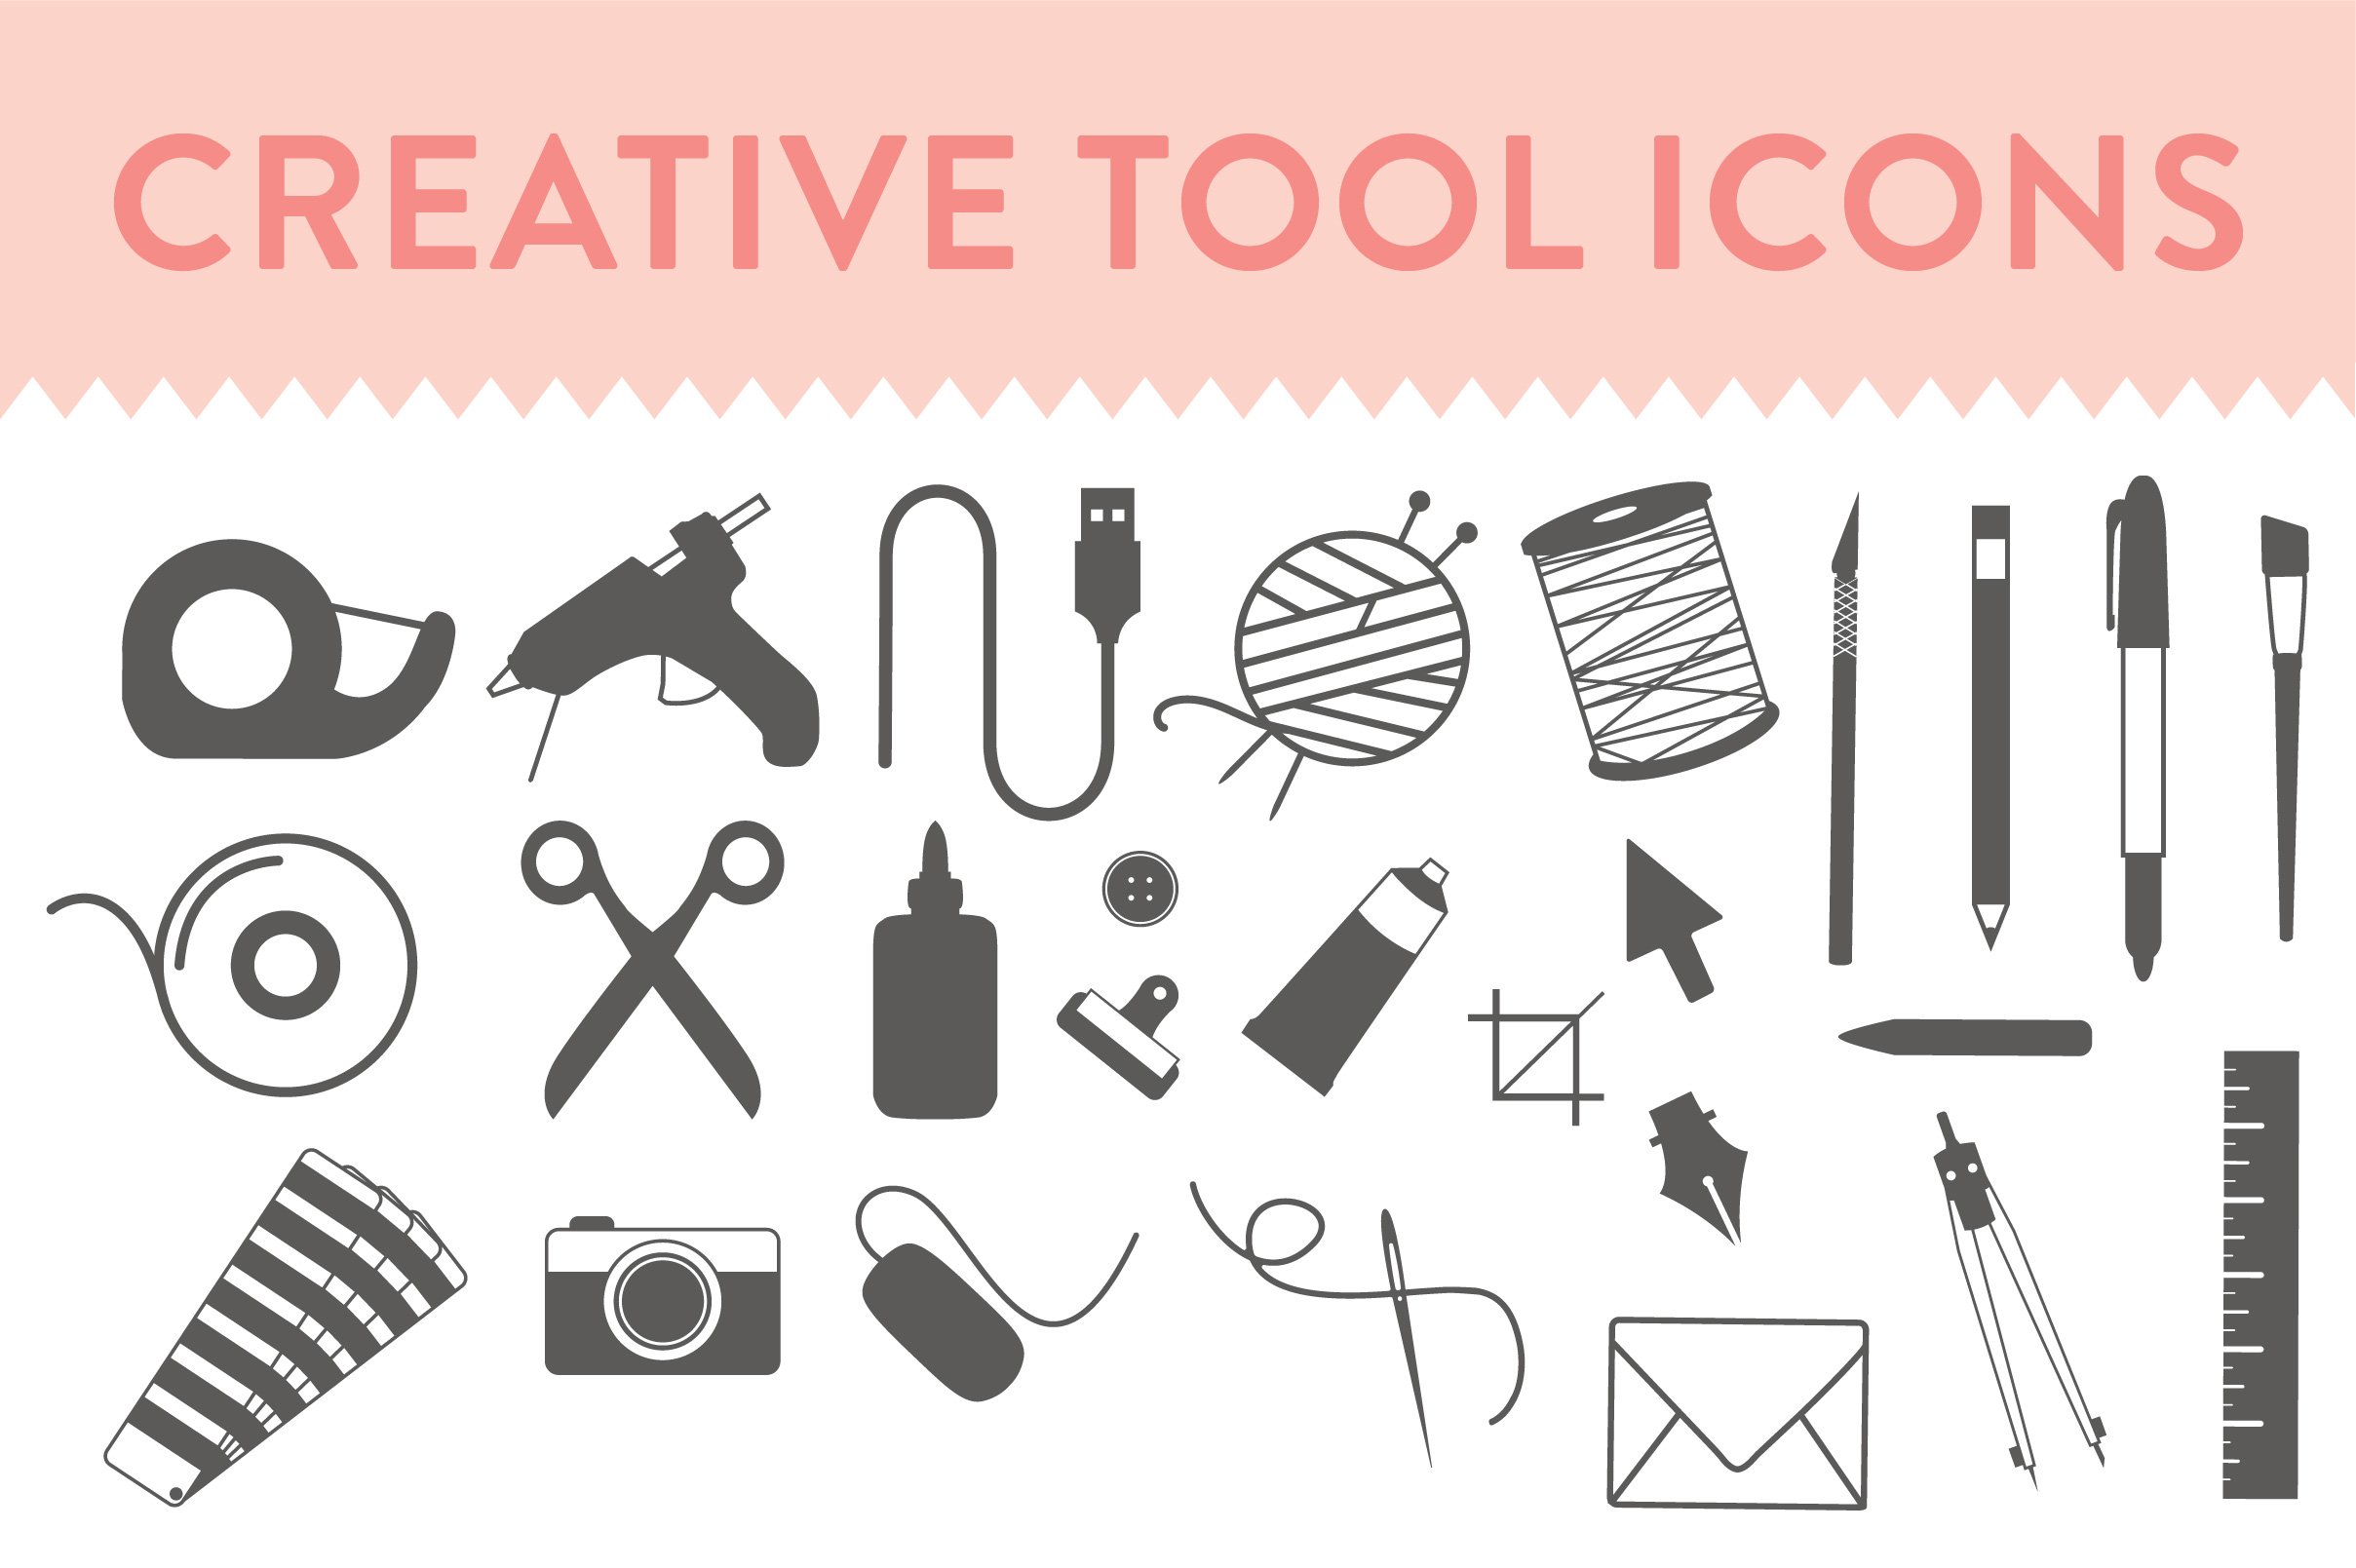 Creative Tool Icons cover image.